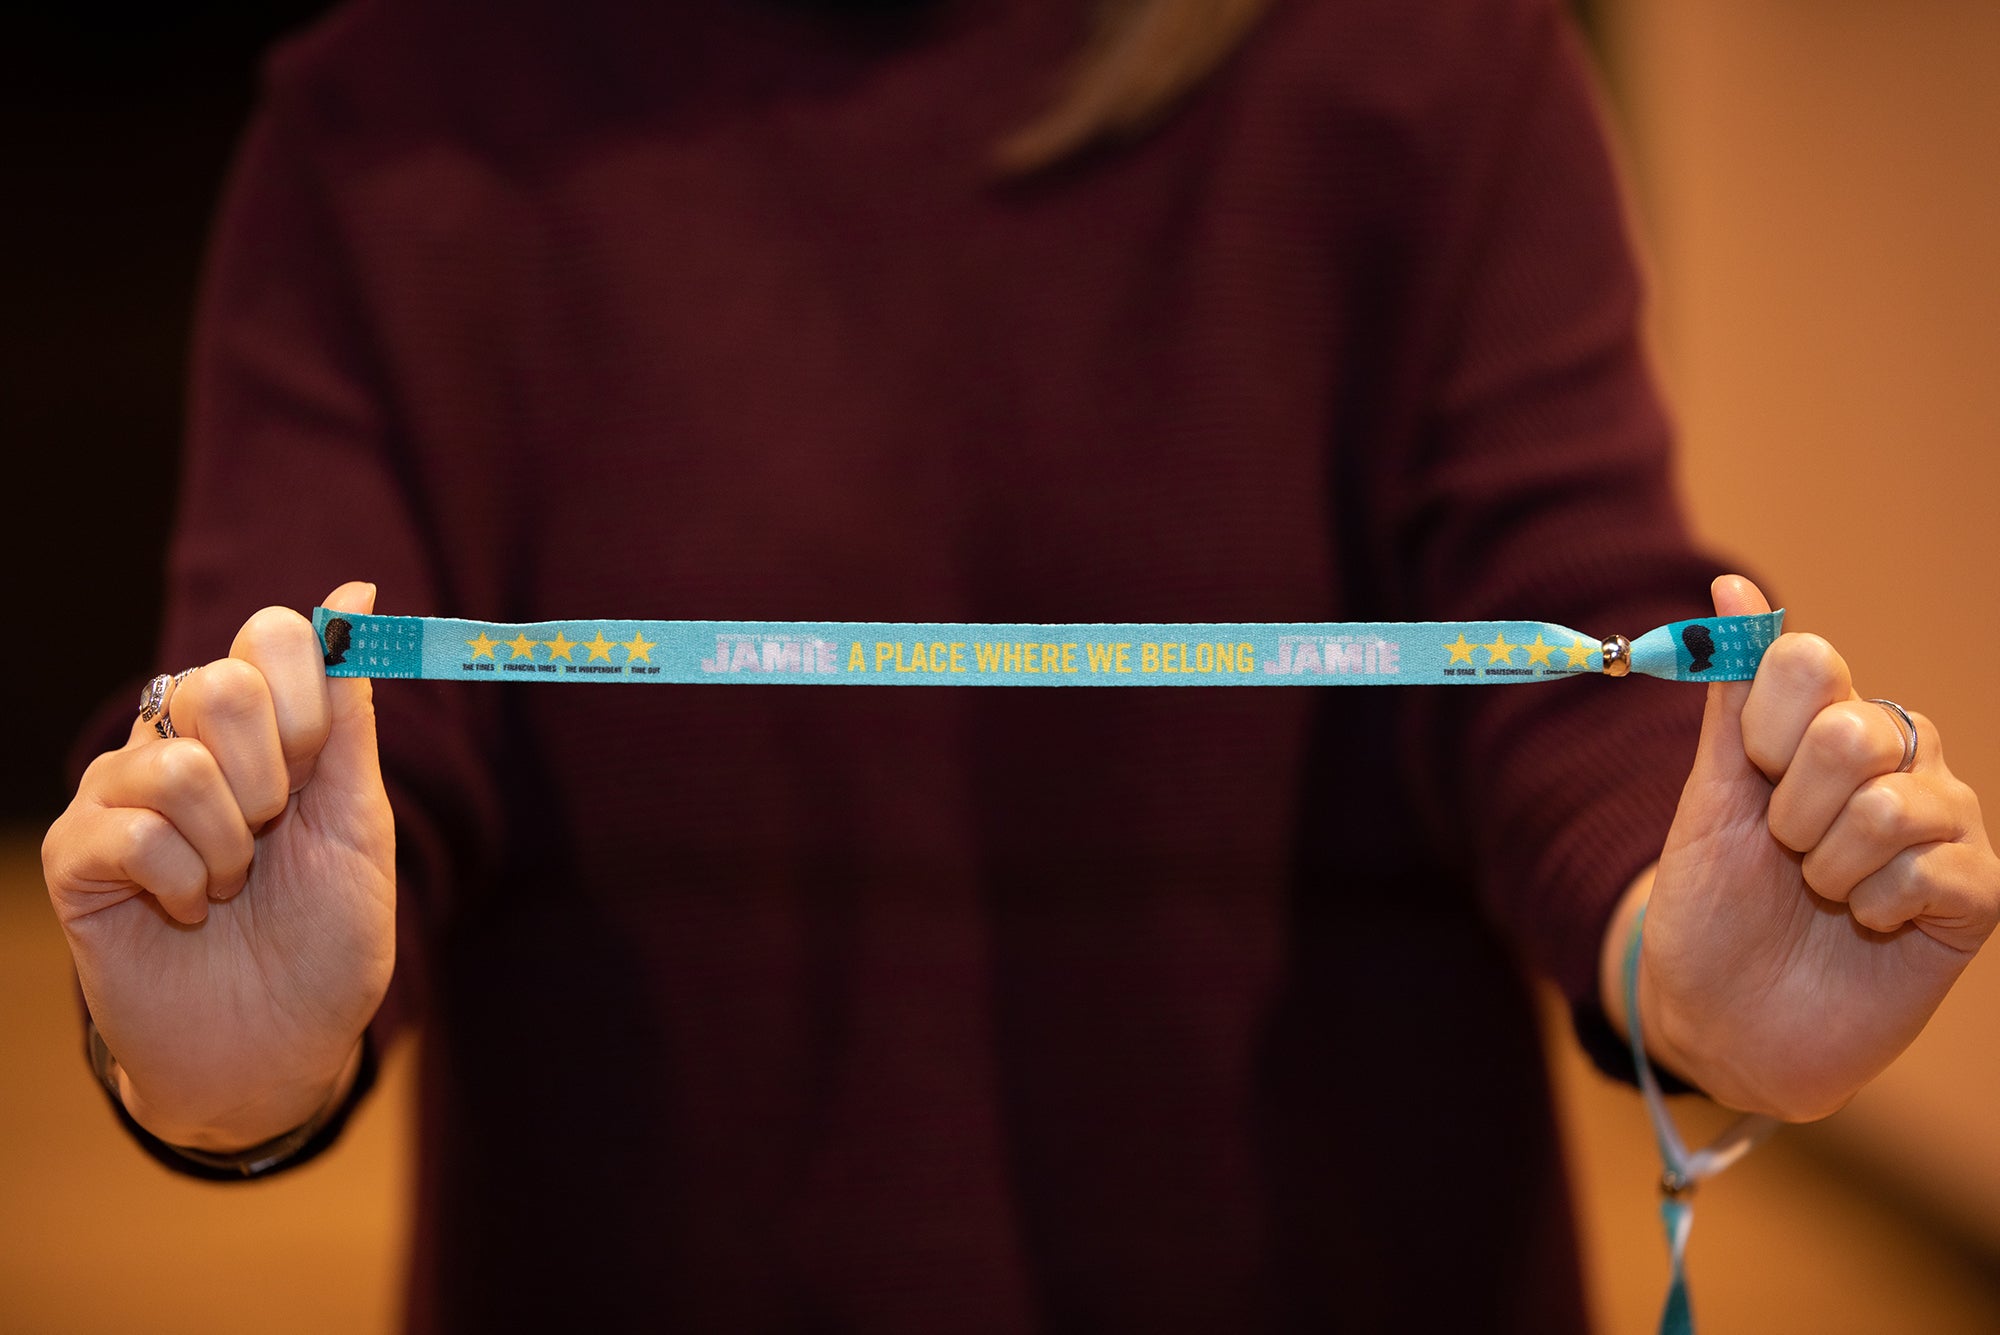 Everybody’s Talking About Jamie Anti-Bullying Wristband